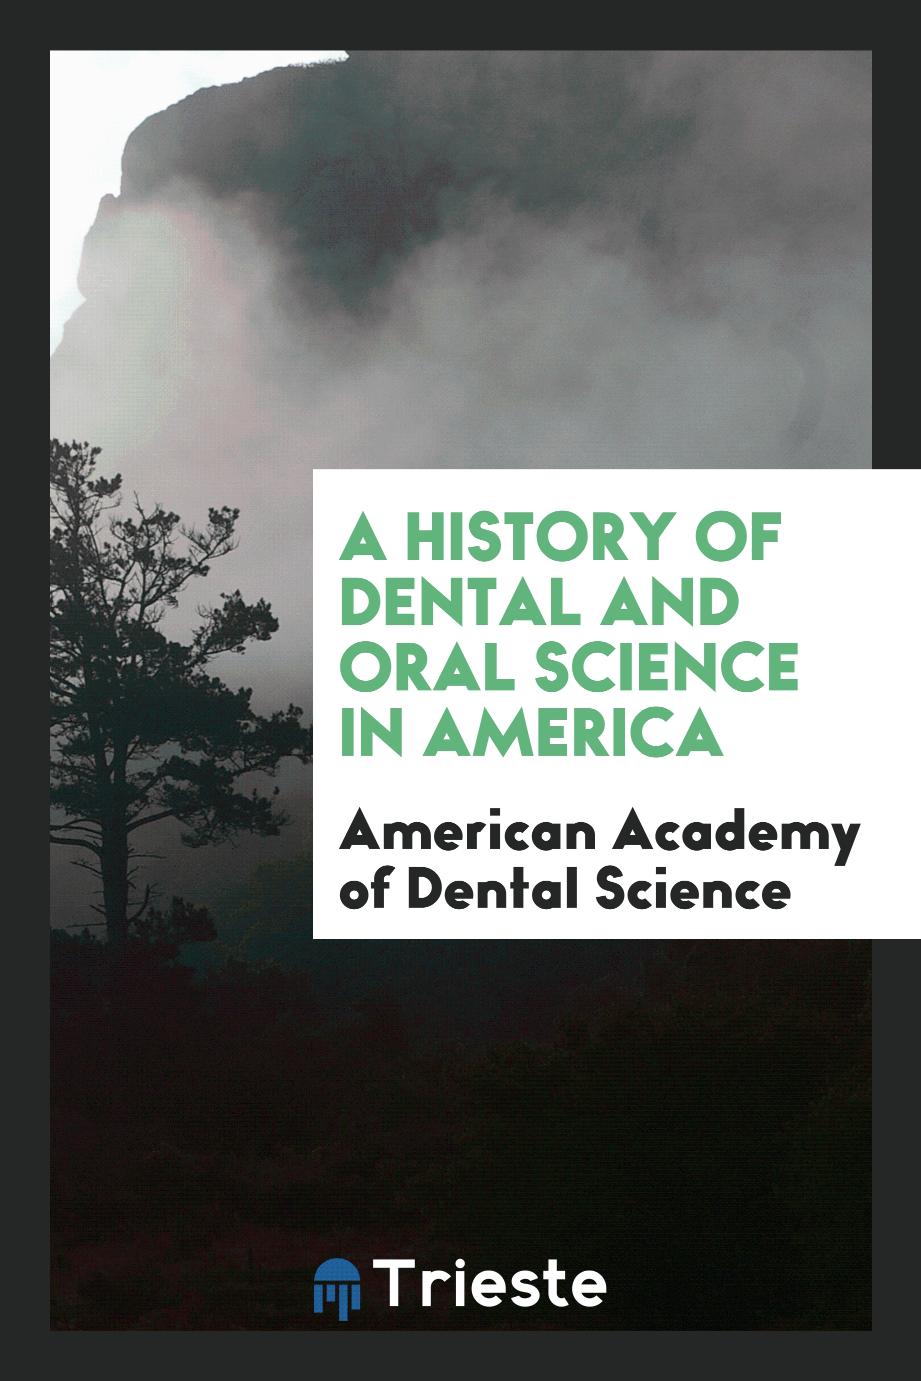 American Academy of Dental Science - A History of Dental and Oral Science in America